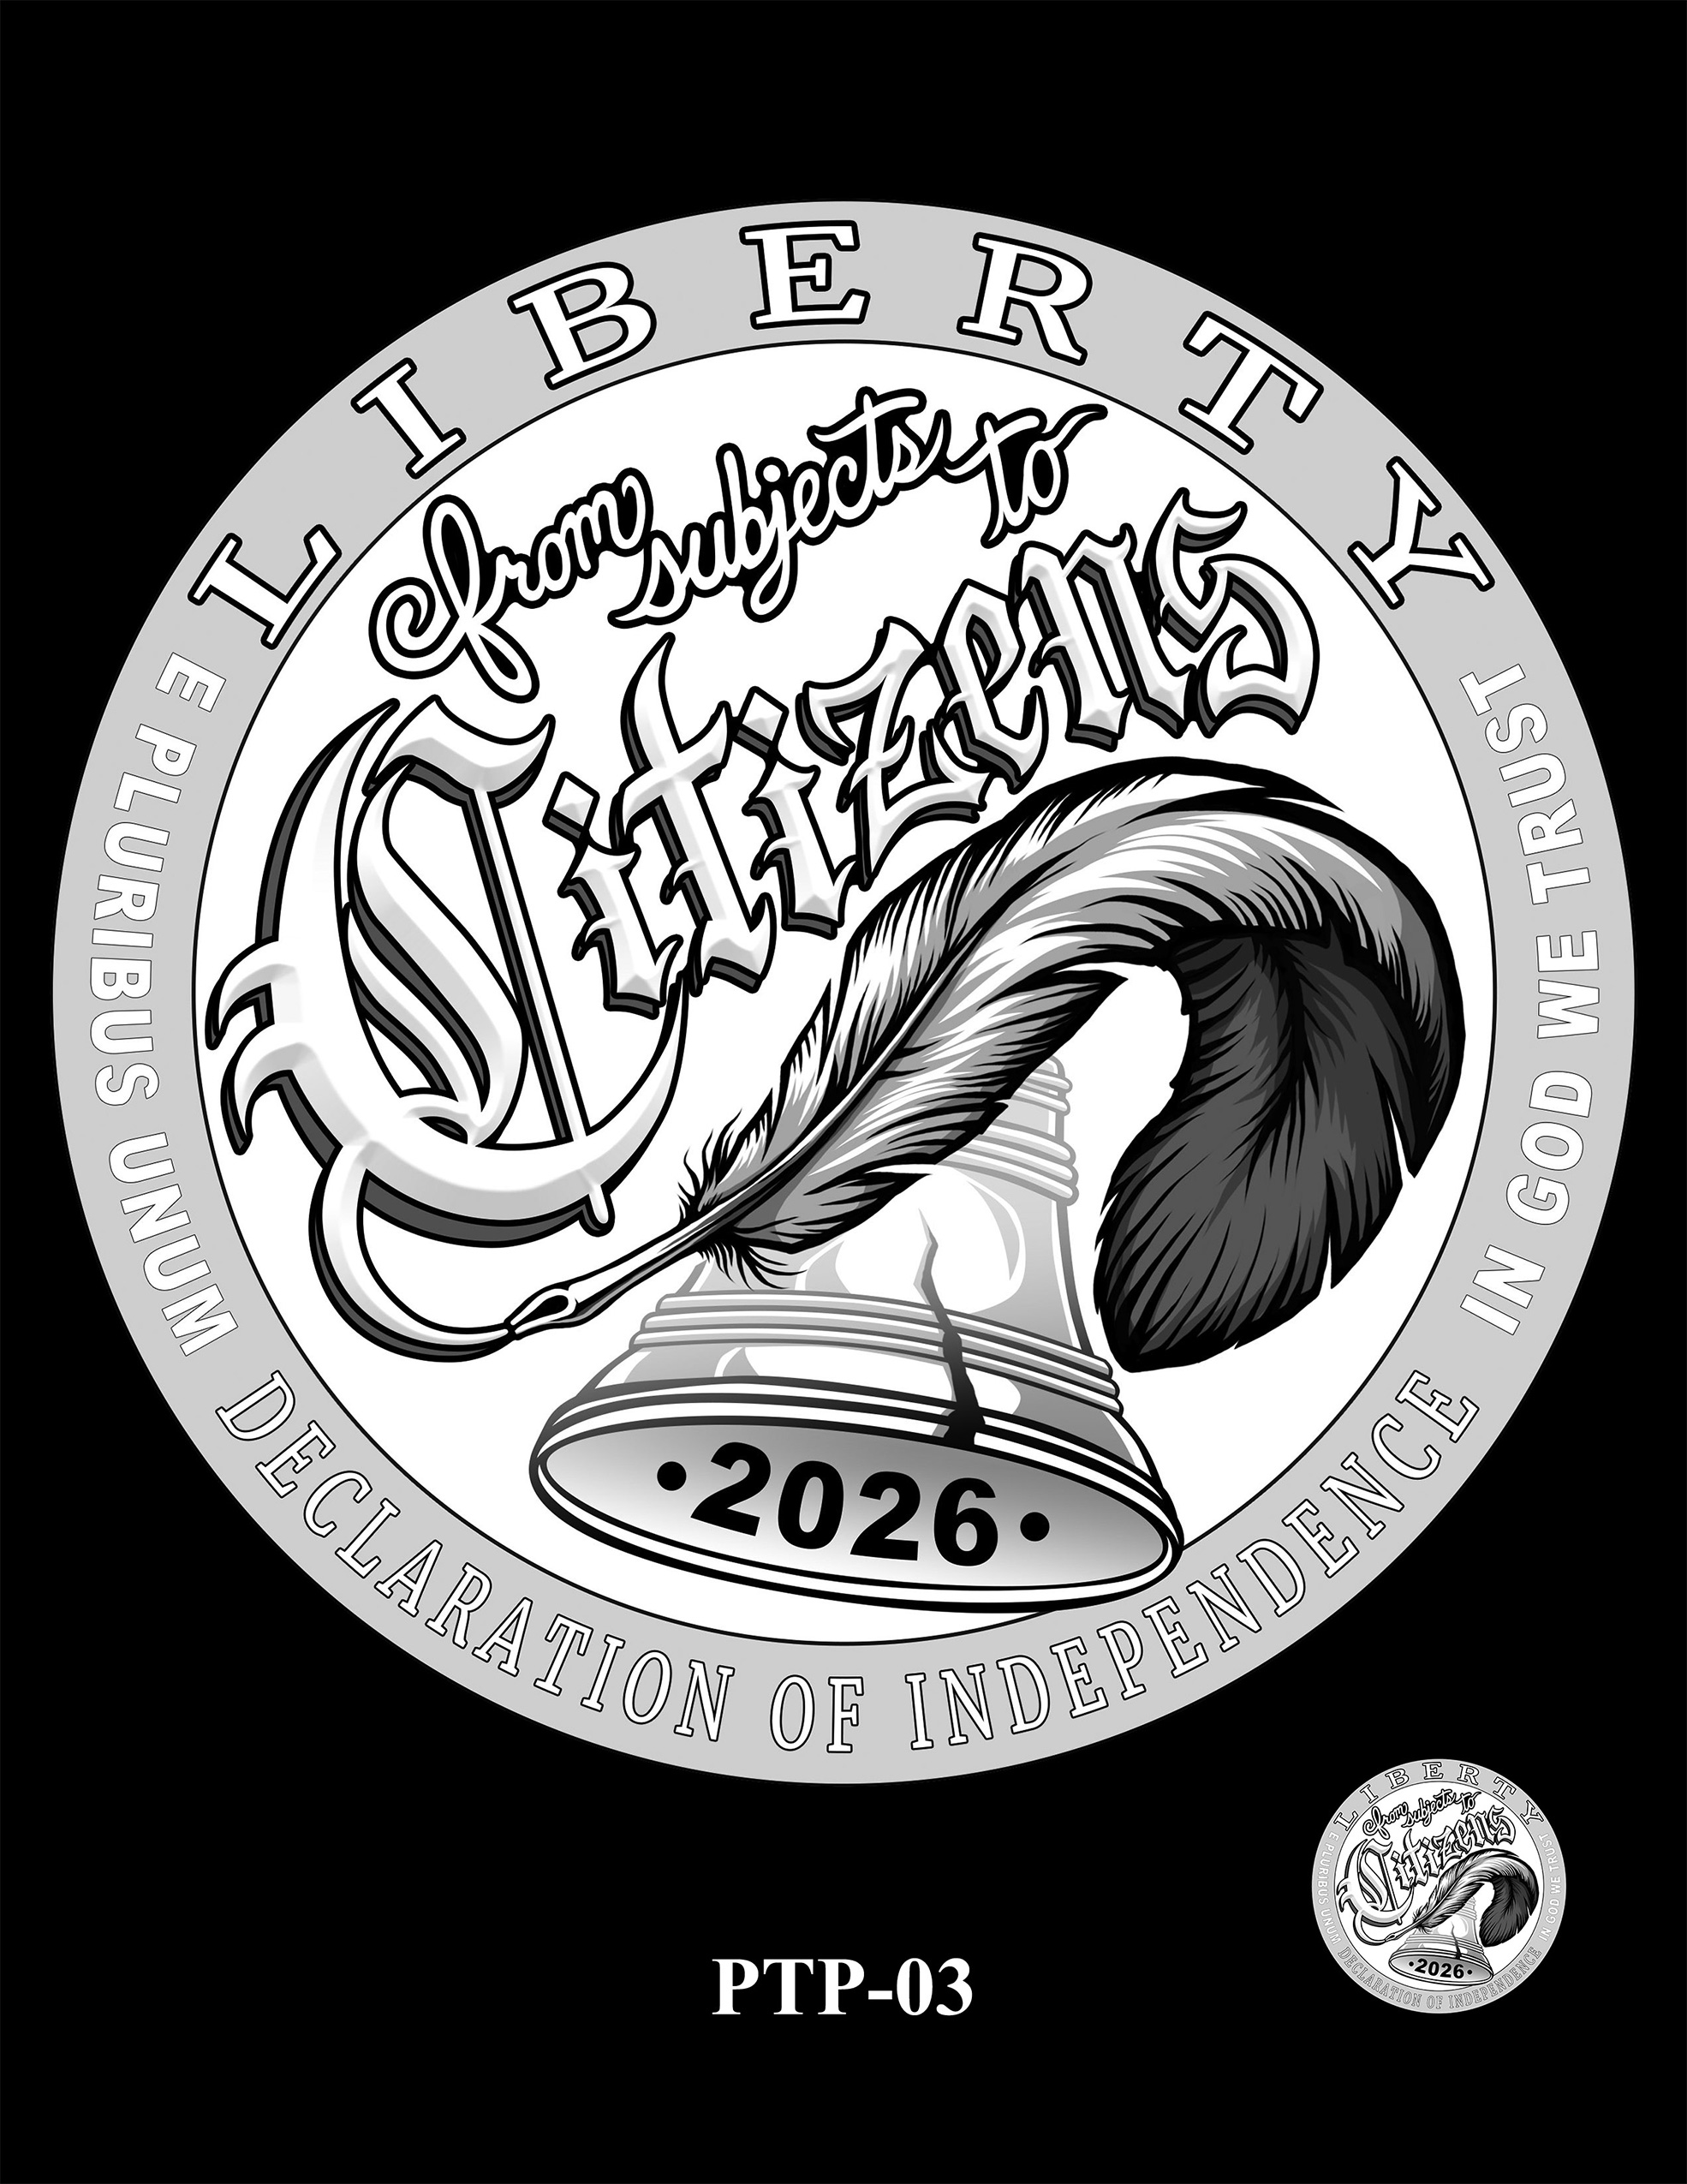 PTP-03 -- 2026 Platinum Proof Coin - Declaration of Independence